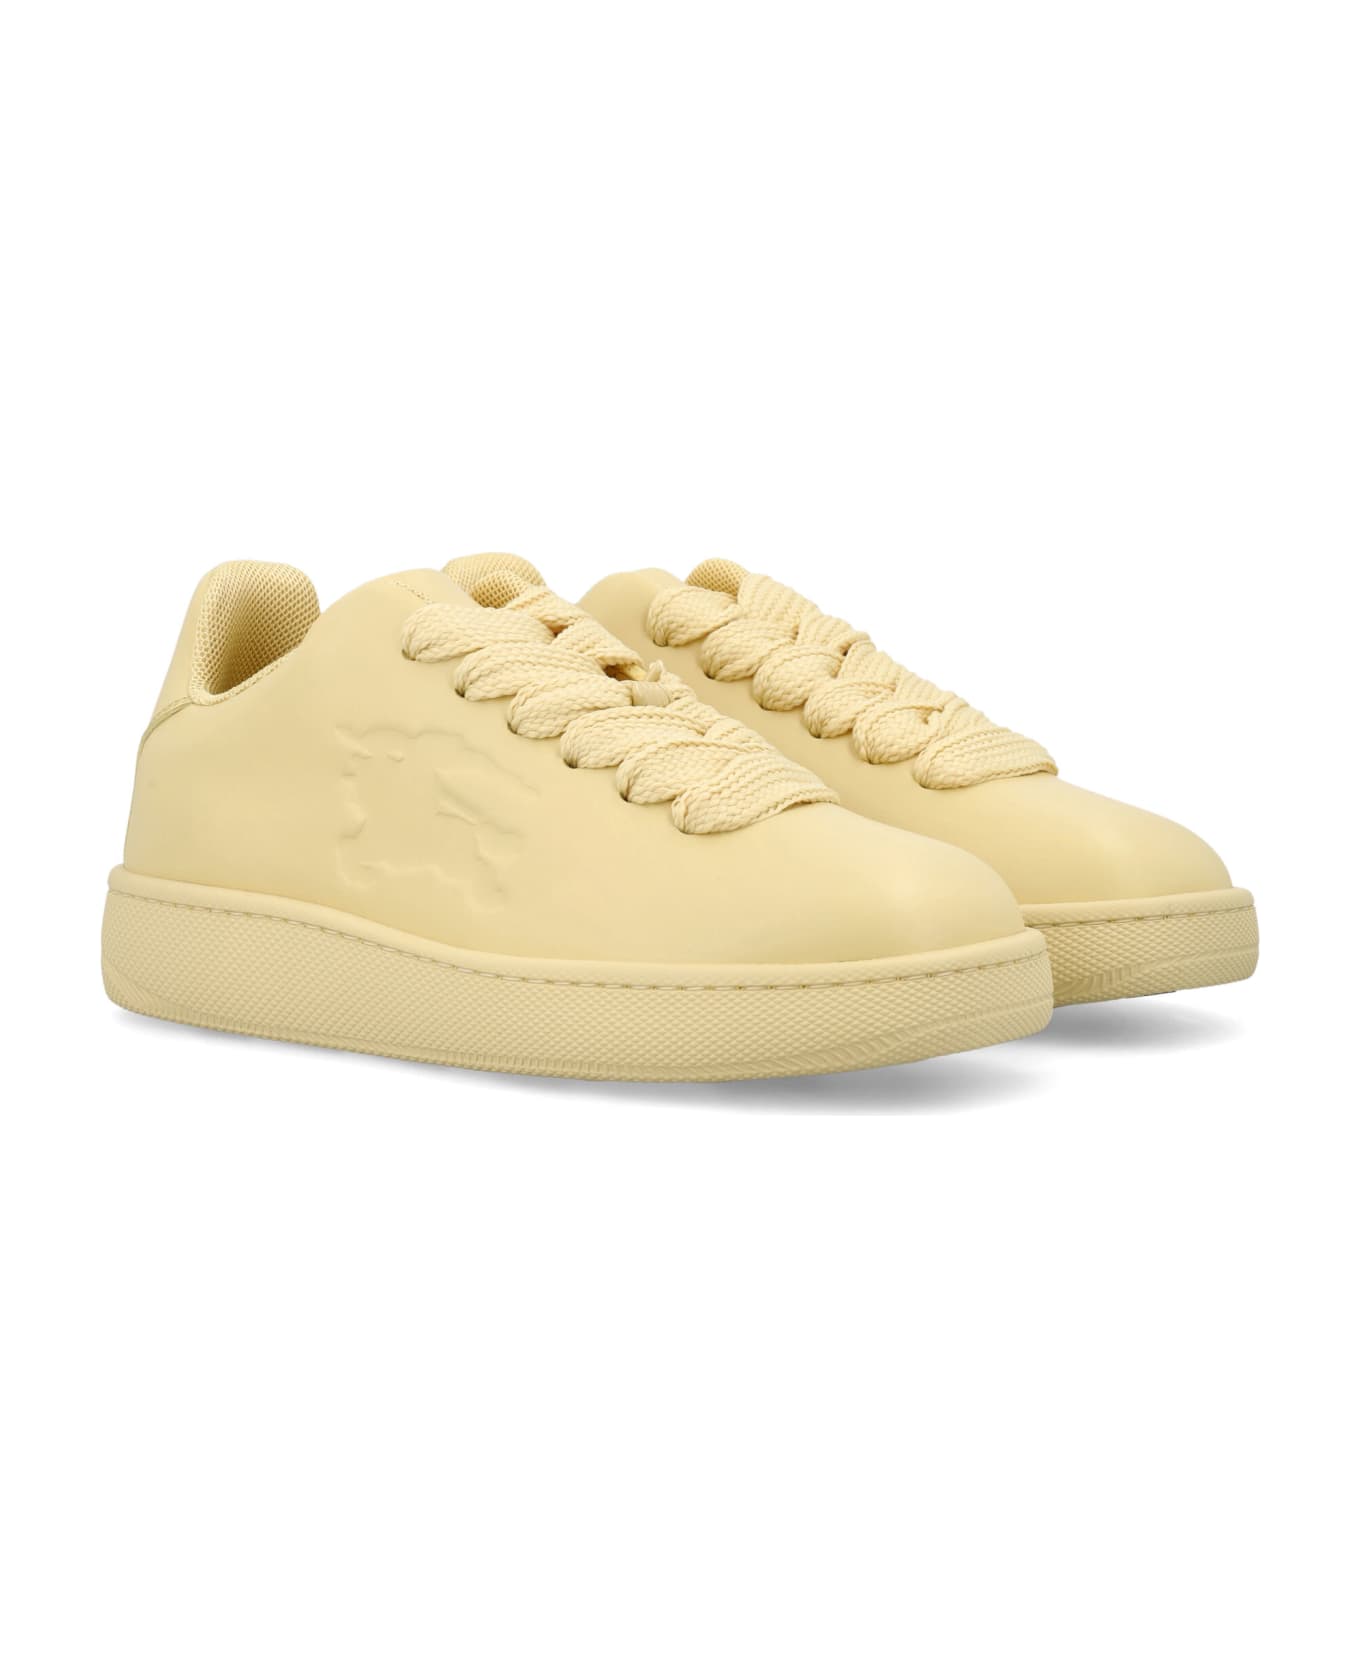 Burberry London Leather Box Sneakers - DAFFODIL